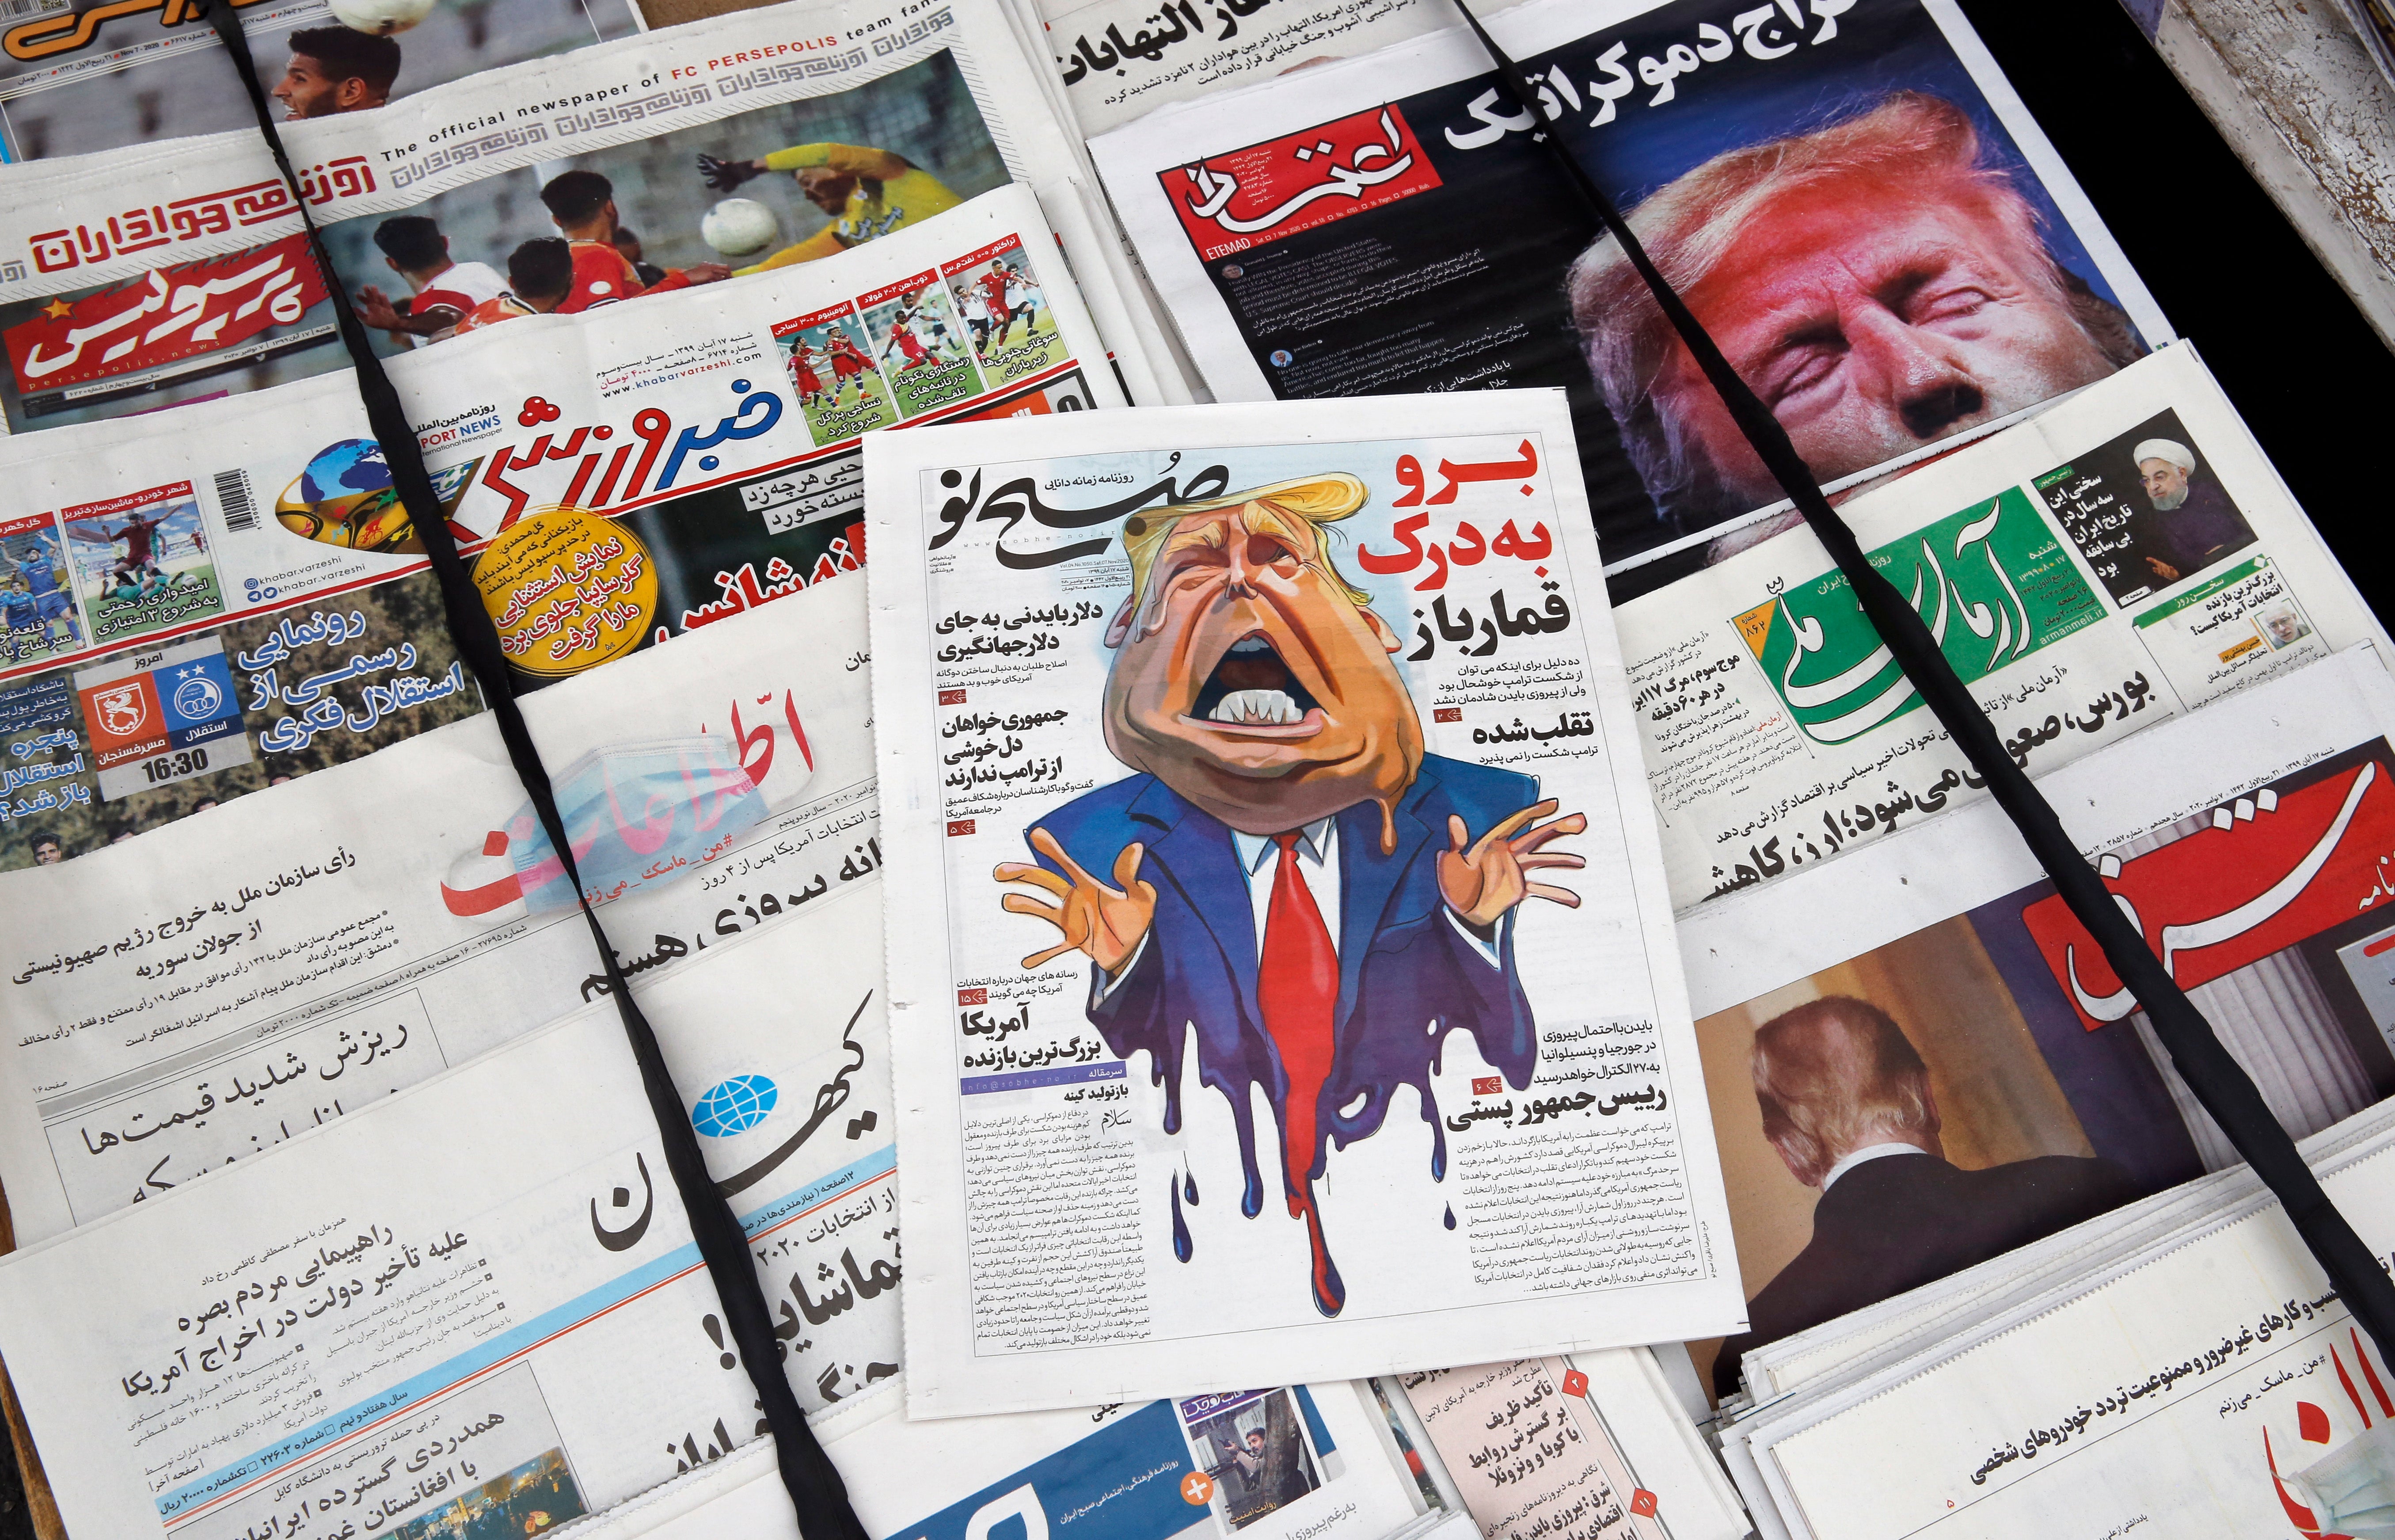 Newspapers in Iran react to Trump losing election